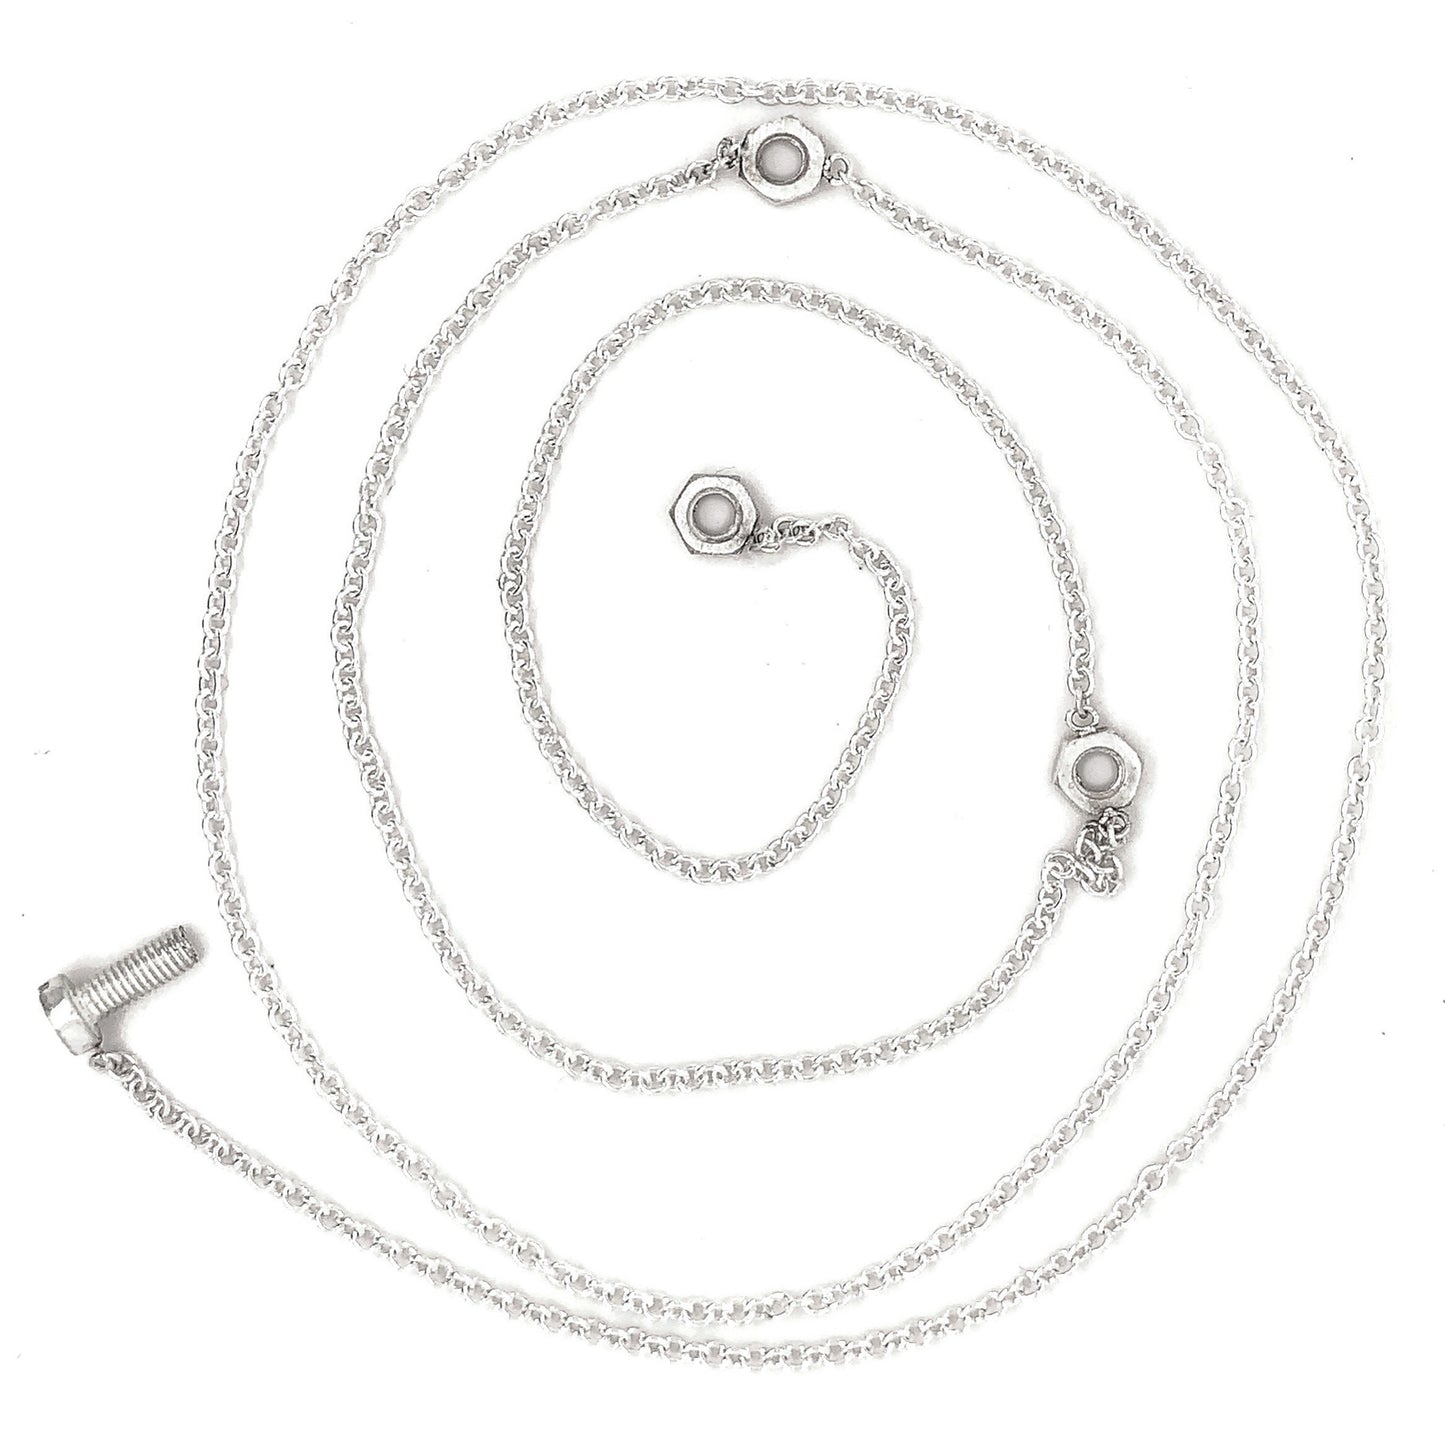 Screw & Bolt Necklace in Silver